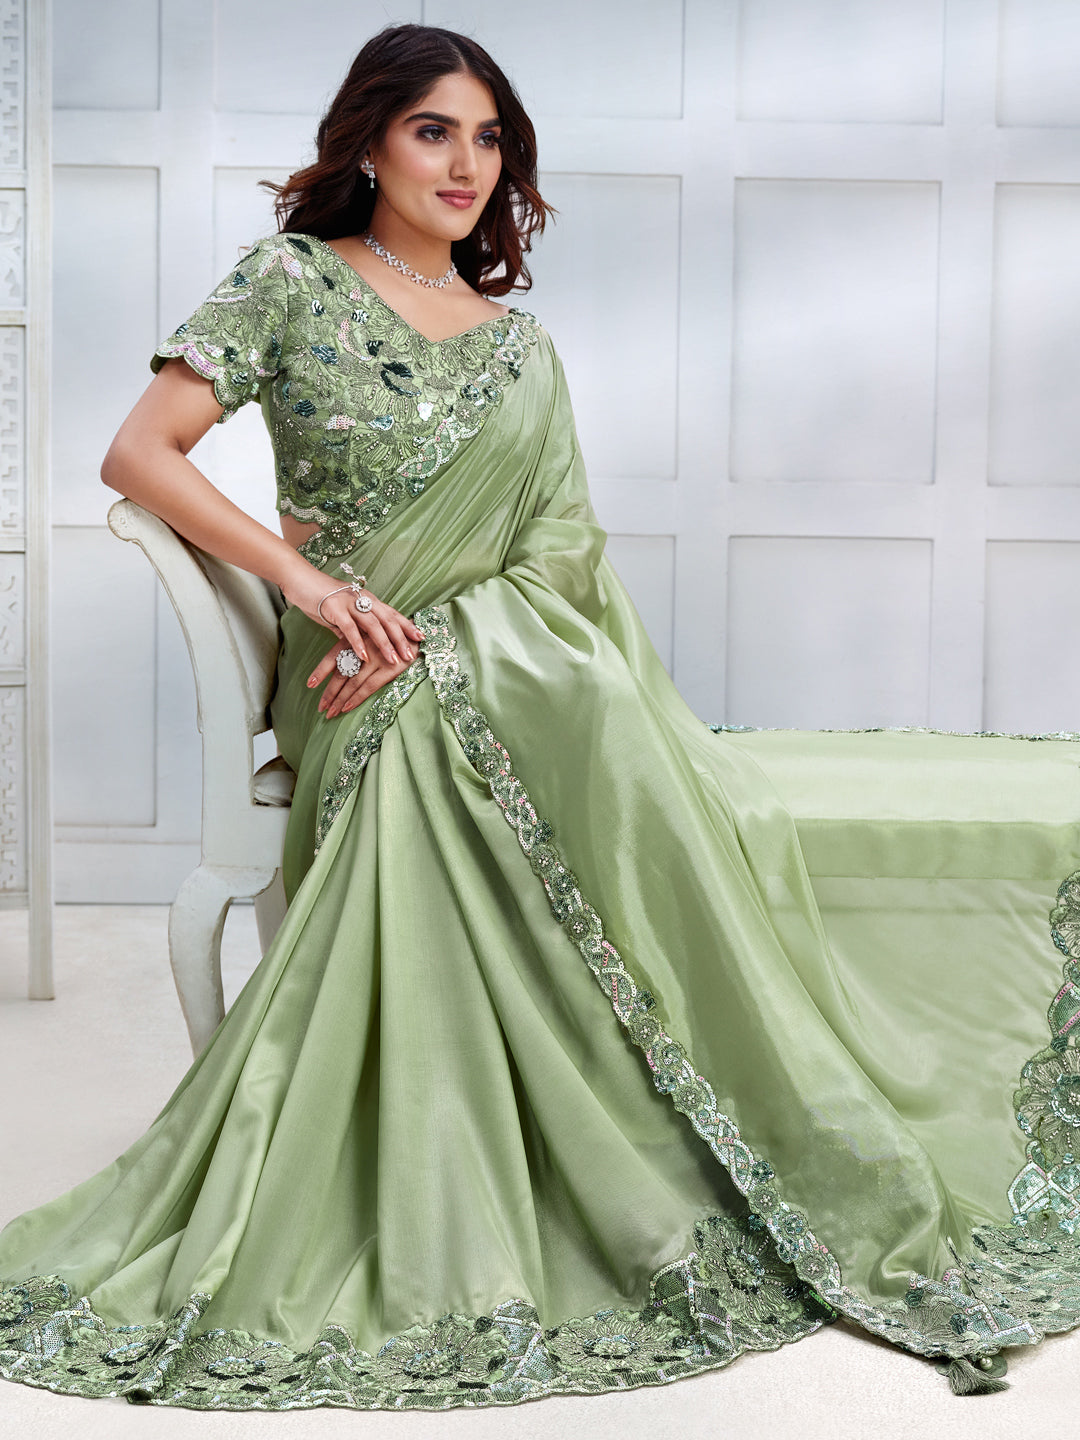 Embroidered Silk Traditional Partywear Saree In Green Color-81787